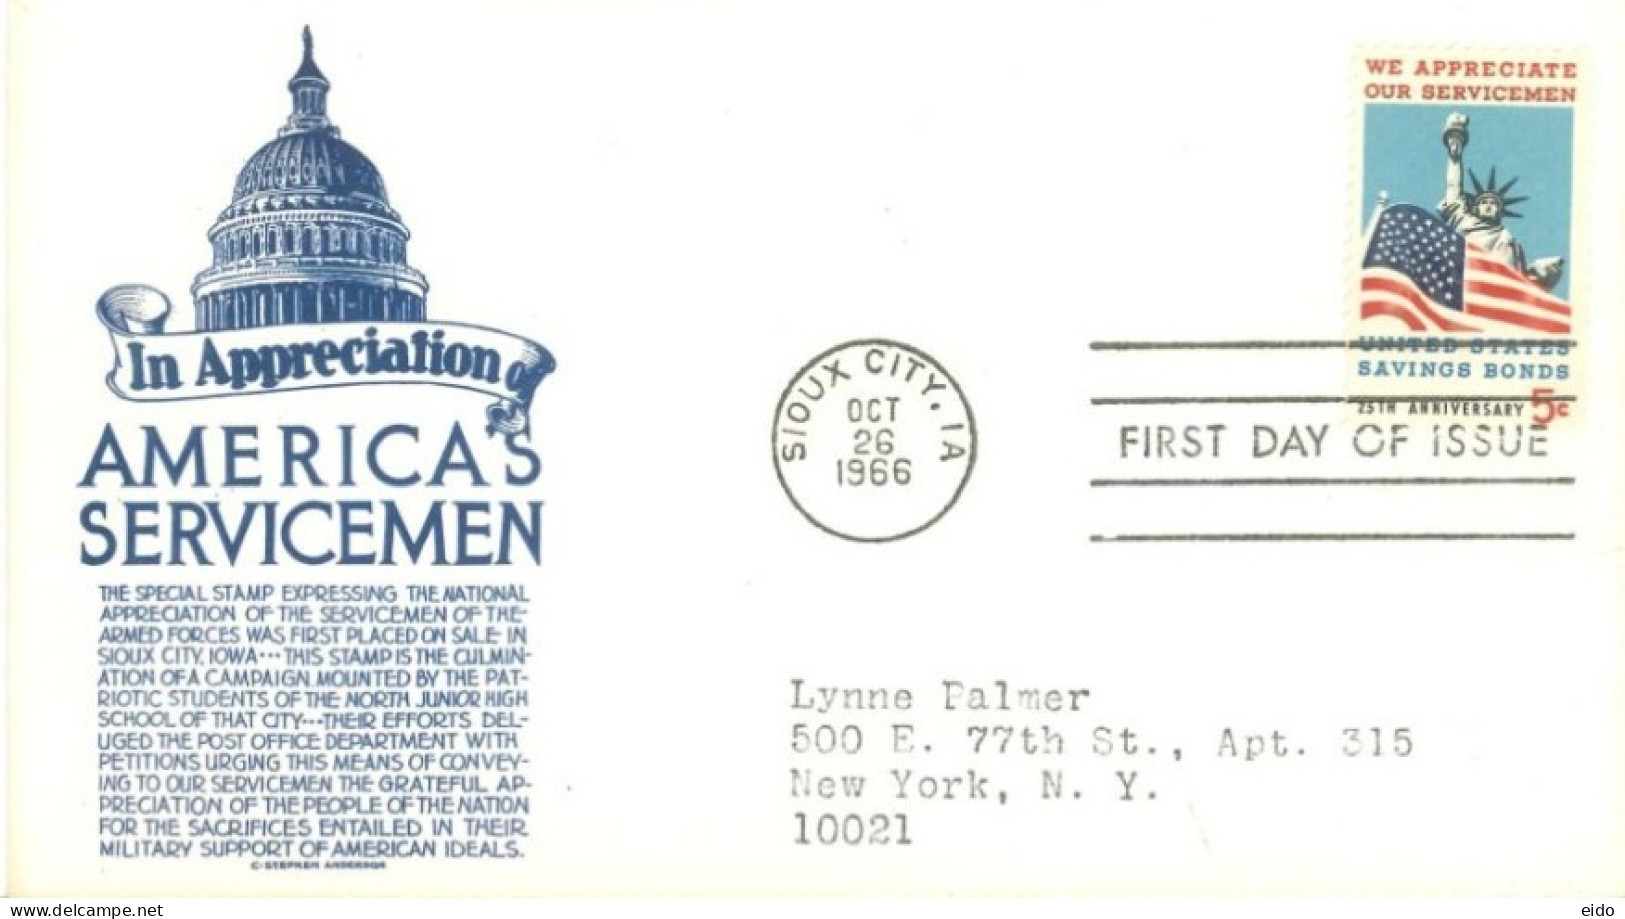 U.S.A.. -1966 -  FDC STAMP IN APPRECIATION OF AMERICA'S SERVICEMEN SENT TO NEW YORK. - Covers & Documents